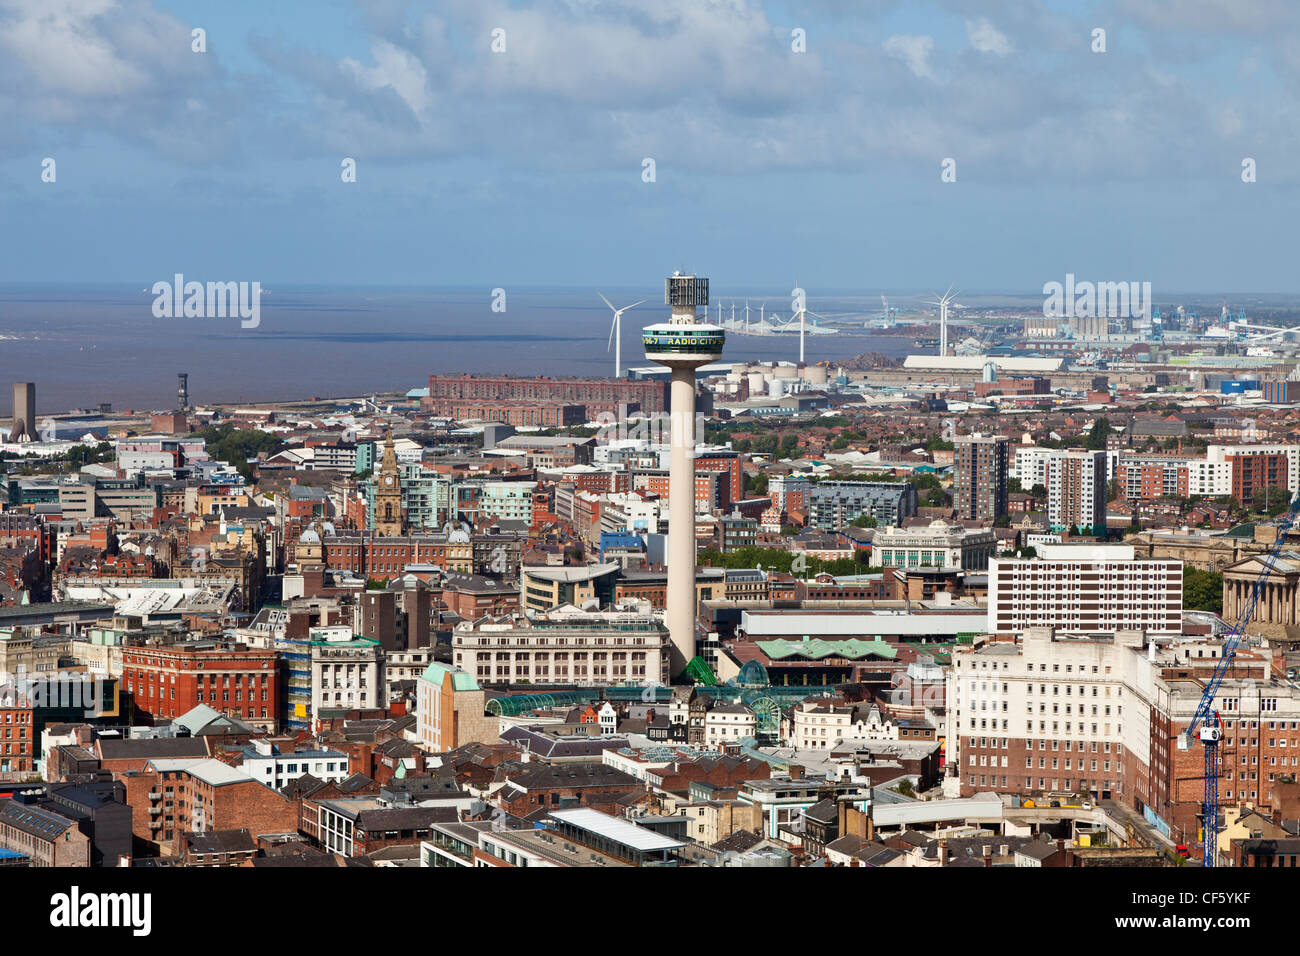 Aerial view over the city towards the Mersey Estuary, featuring the Radio City Tower (St. John's Beacon). Stock Photo